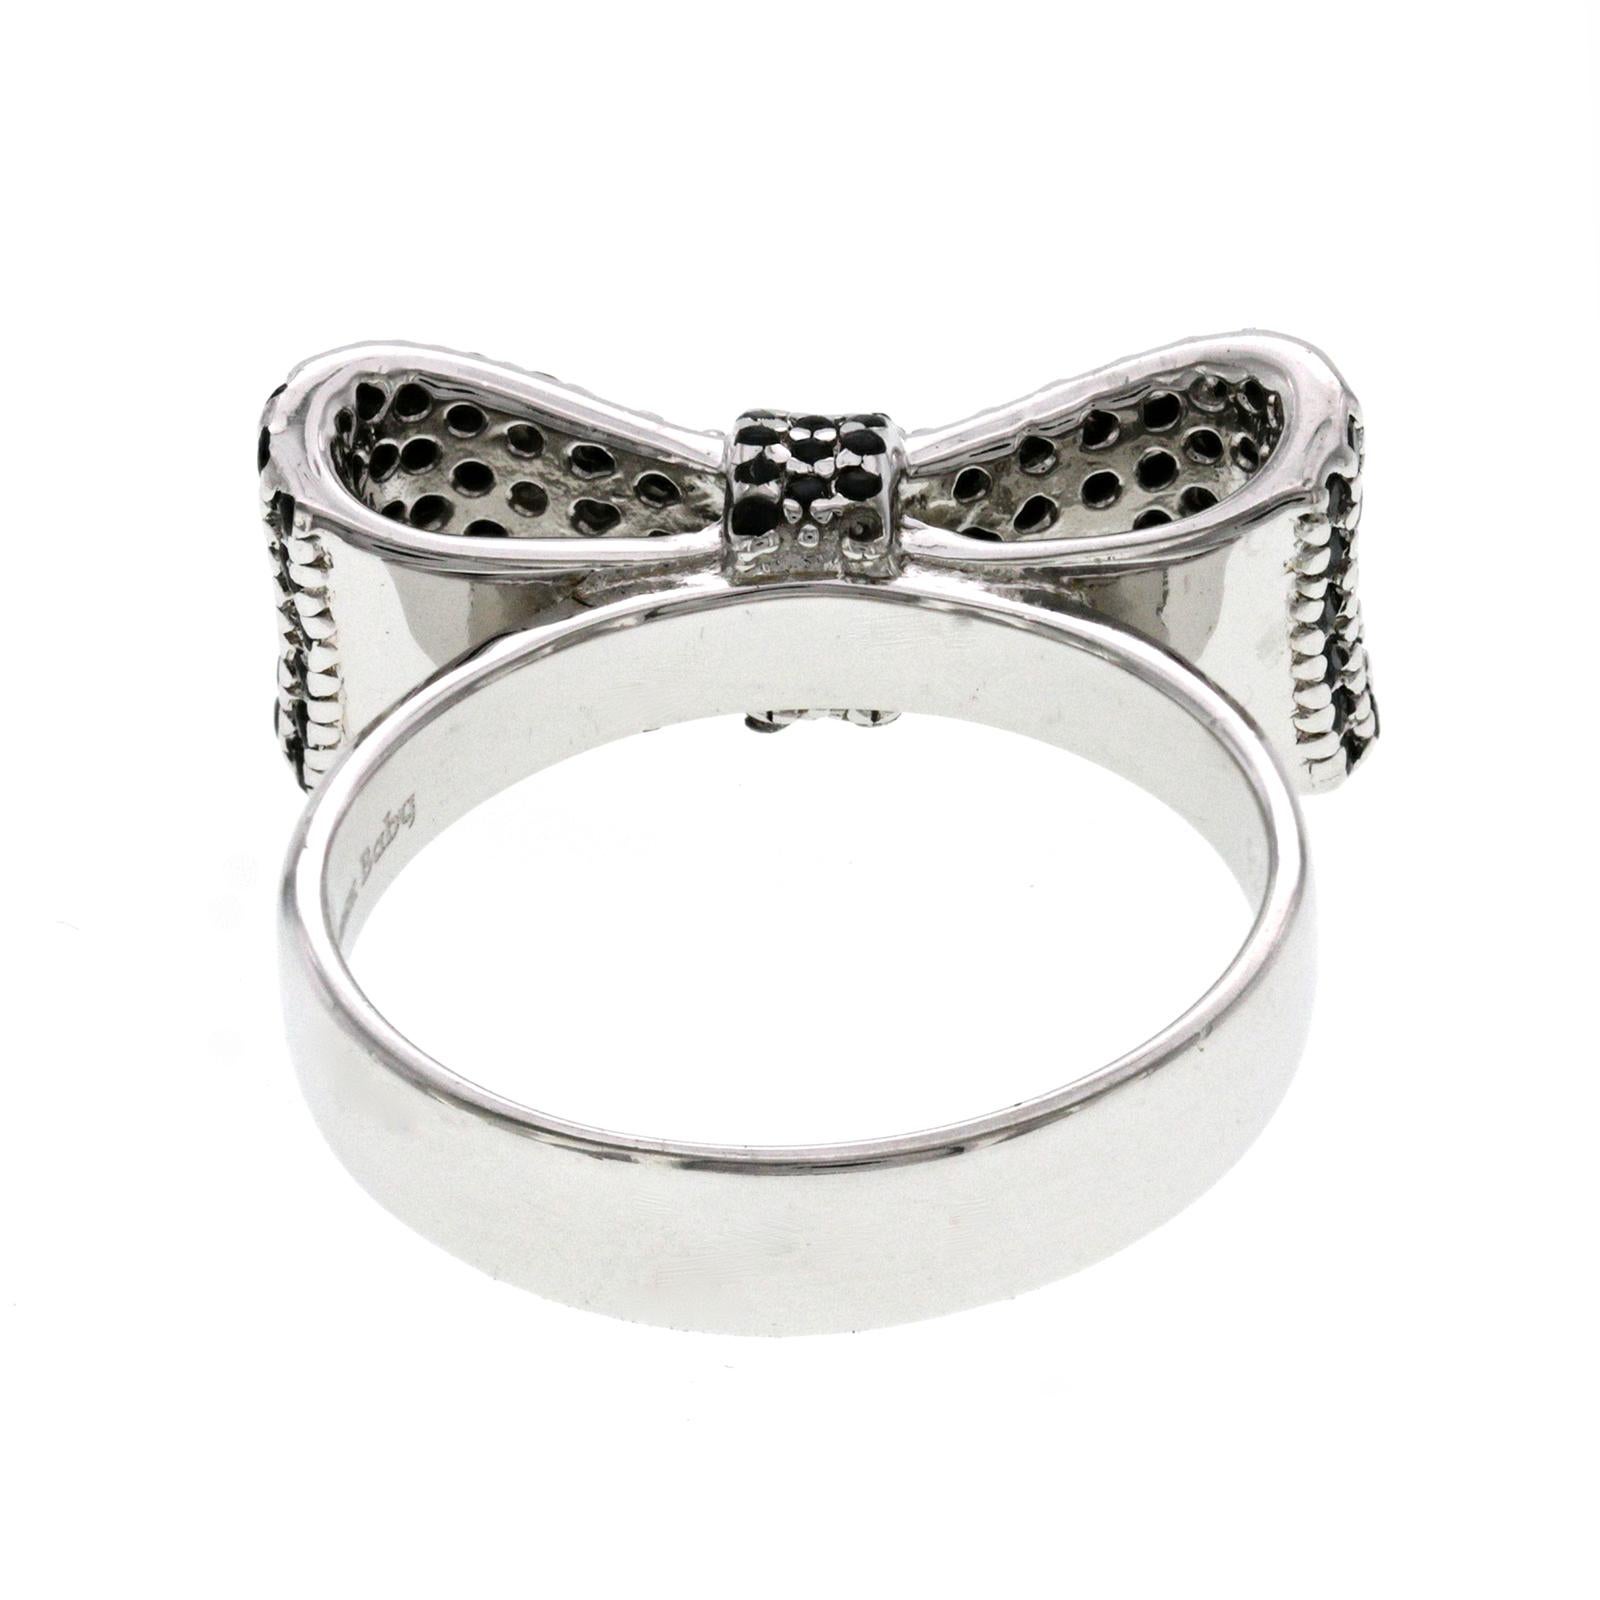 Women's or Men's King Baby Queen Baby 925 Sterling Silver Black CZ Bow Ring